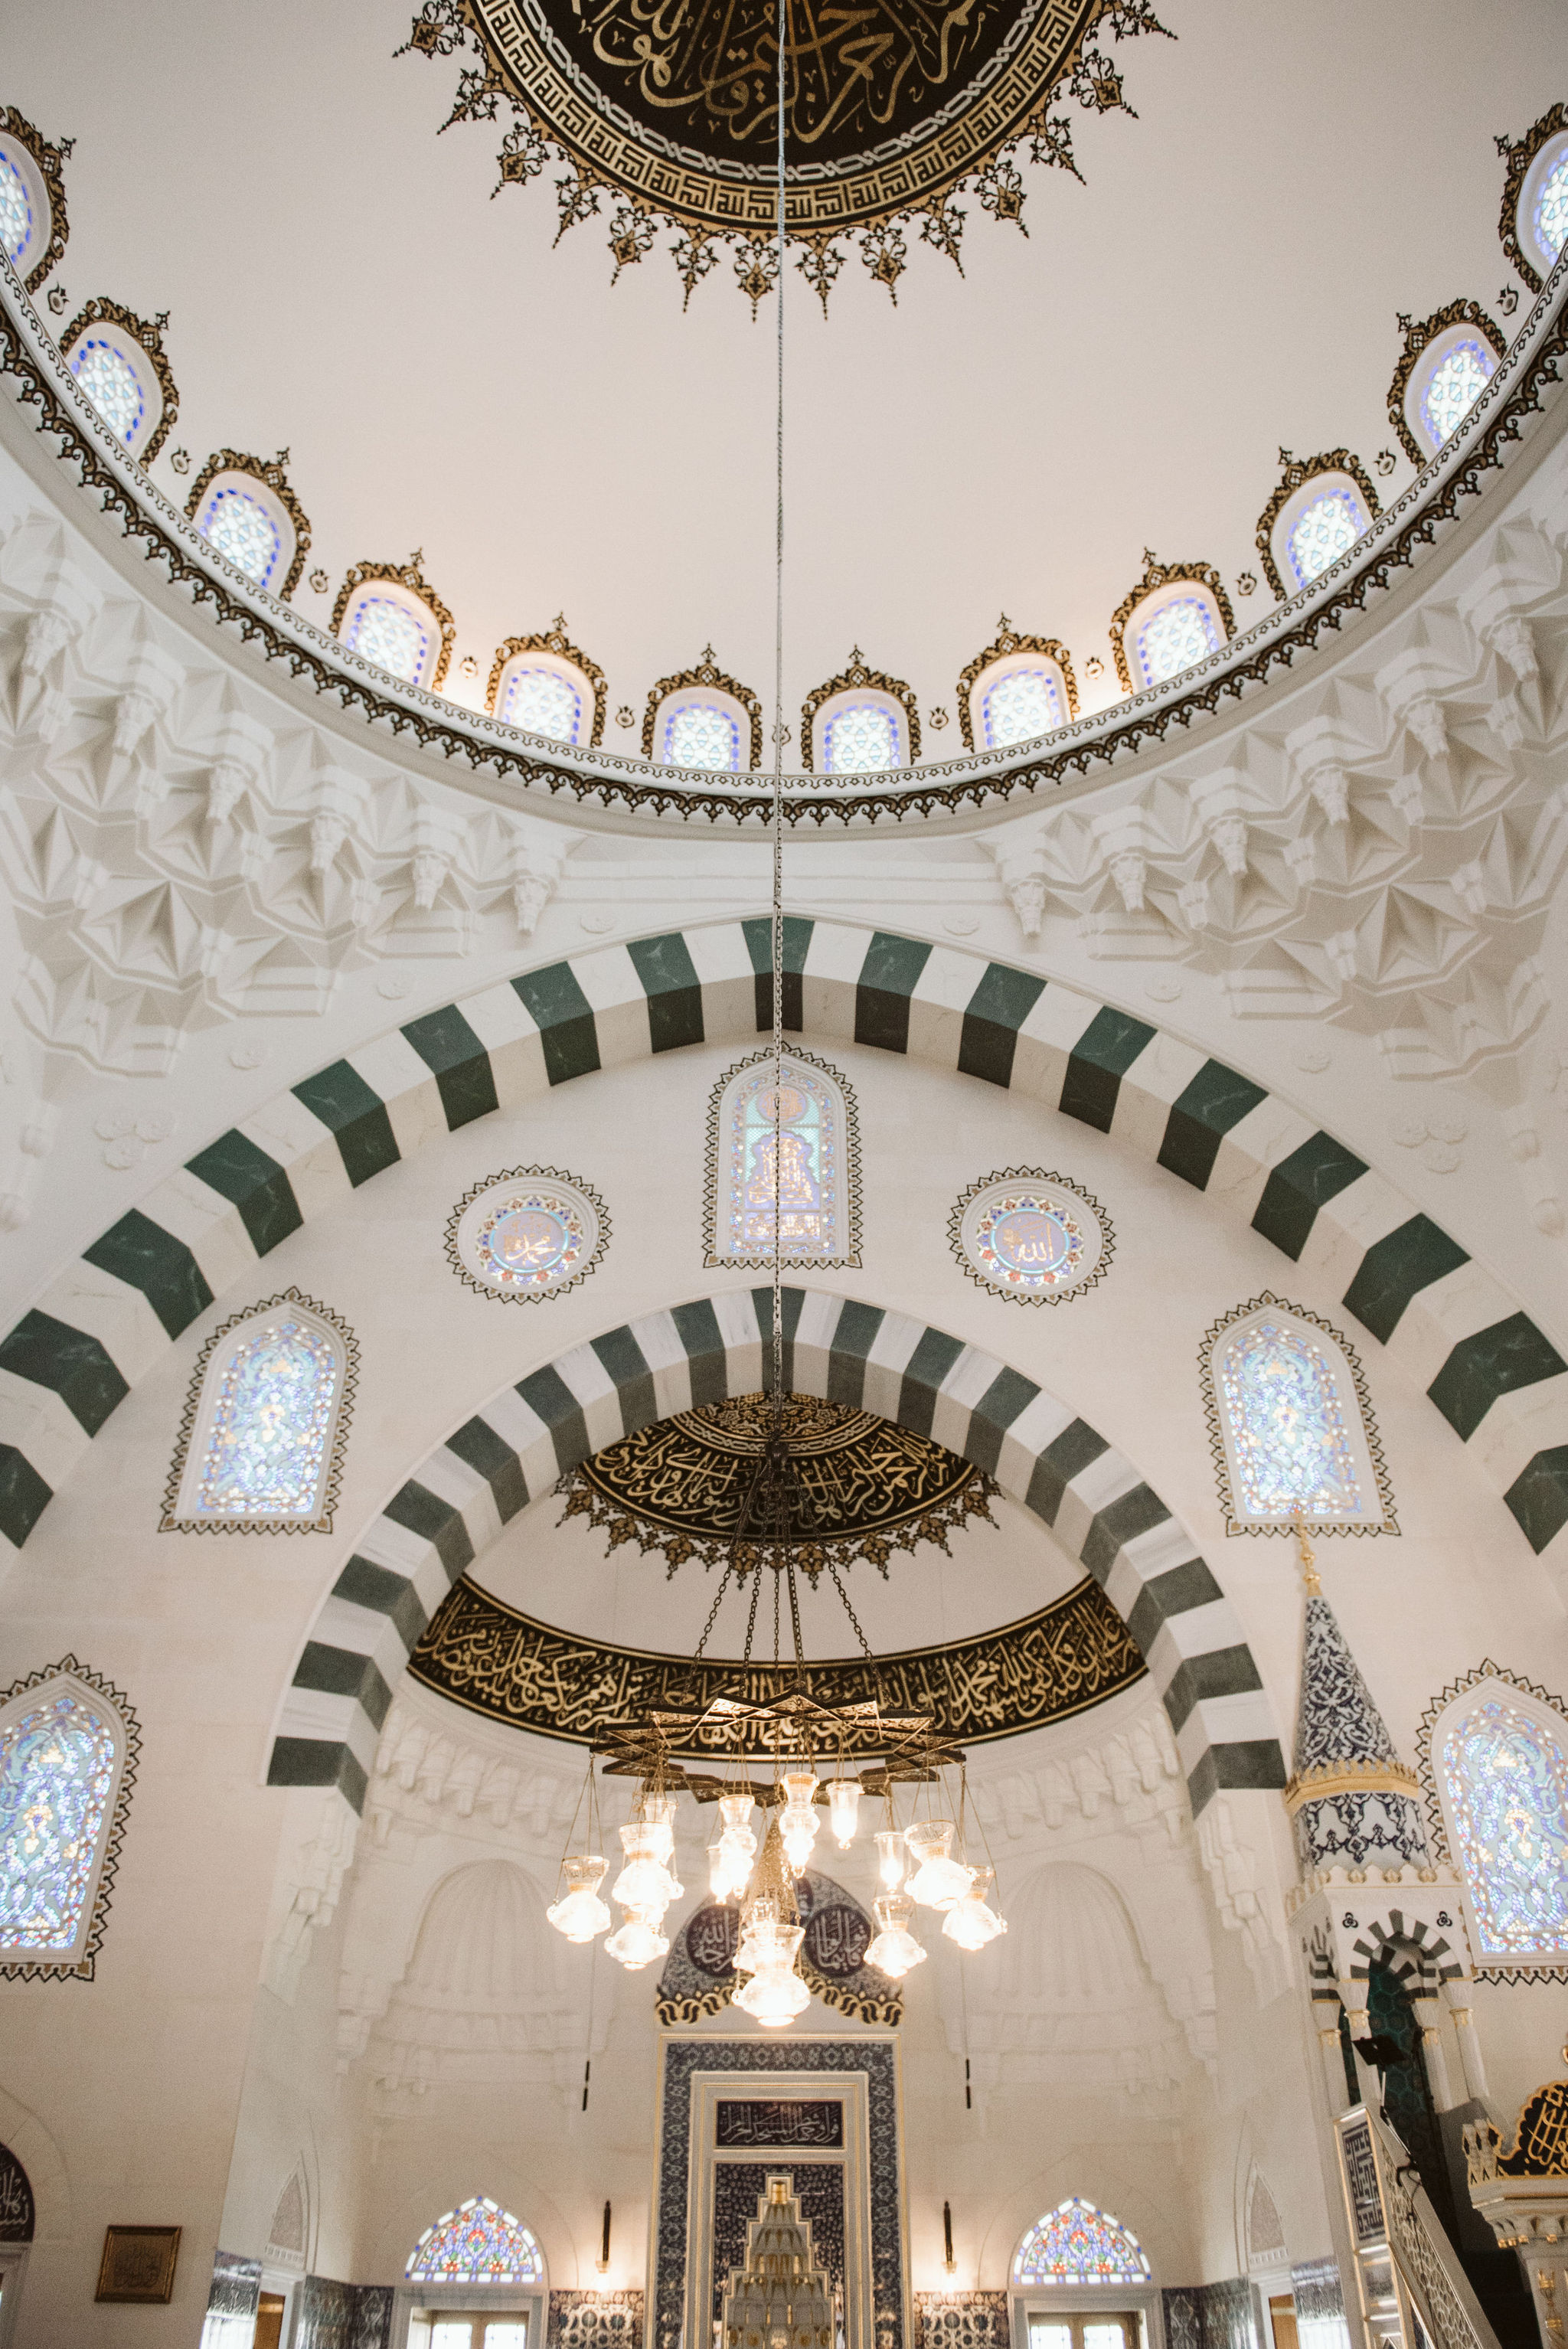  Washington DC, Baltimore Wedding Photographer, Diyanet Center of America, Spring, Intimate Wedding, Traditional, Classic, Palestinian, Turkish Design, Detail Photo of Interior with Archways and Elaborate Light Fixture 